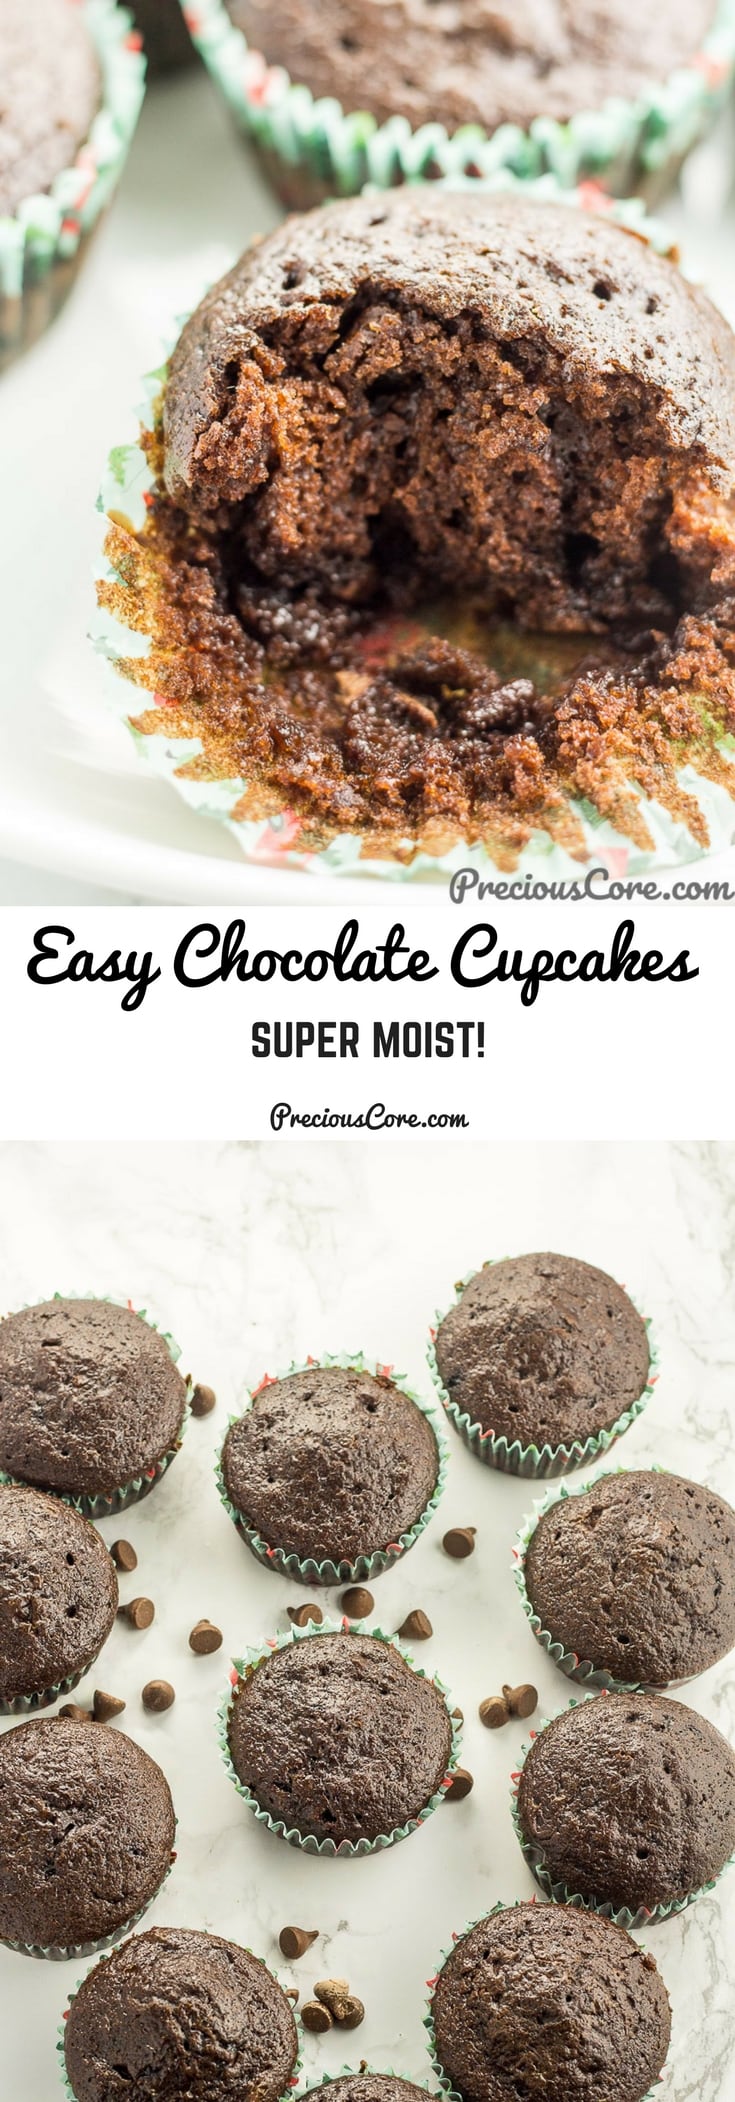 These easy moist chocolate cupcakes are super easy and super moist as the name implies. All you need is one bowl and a few simple ingredients! Get the recipe on Precious Core. #cupcakes, #chocolatecupcakes #dessert #chocolate